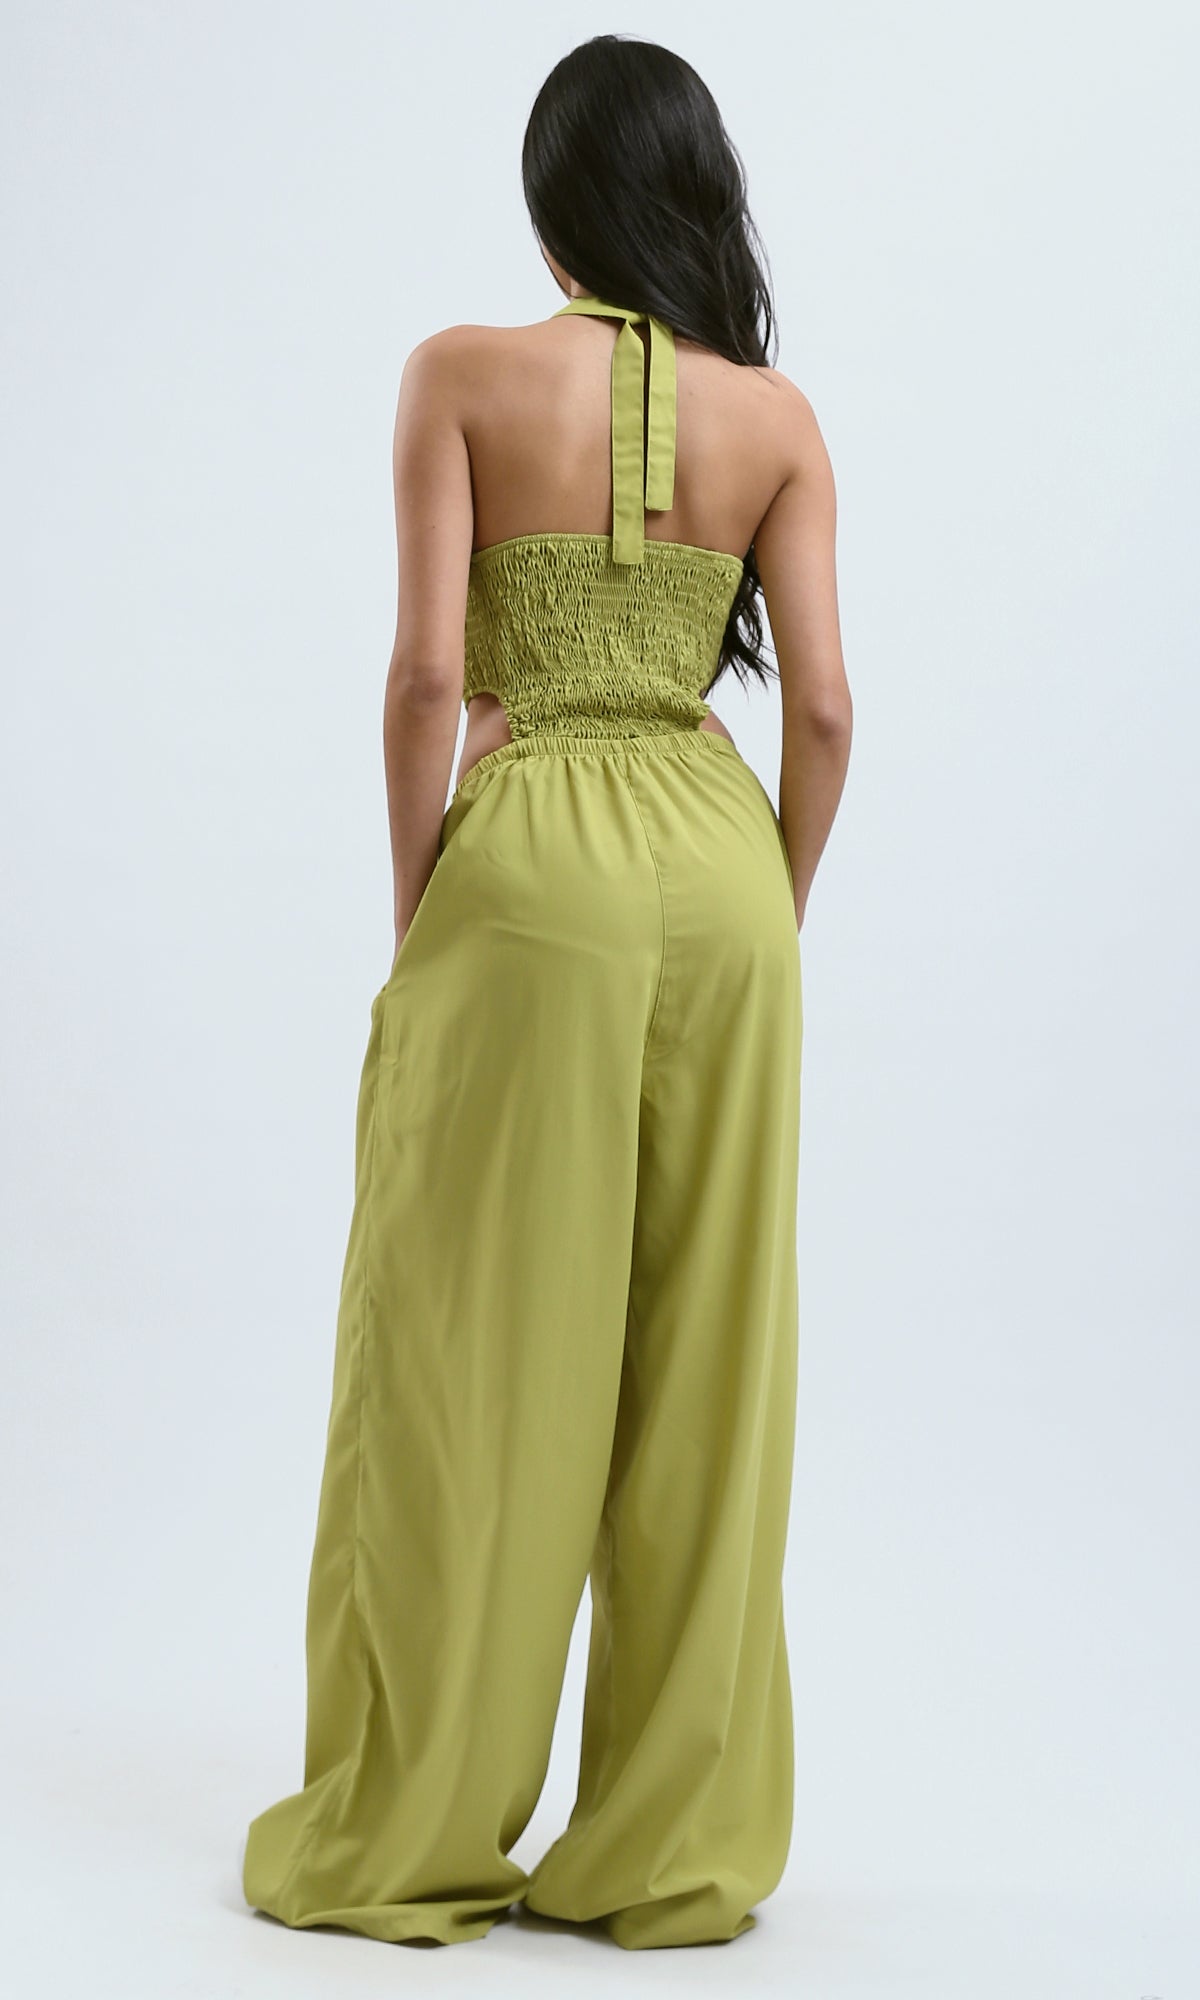 O188399 Sleeveless Lace-Up Lime Jumpsuit With Side Cuts